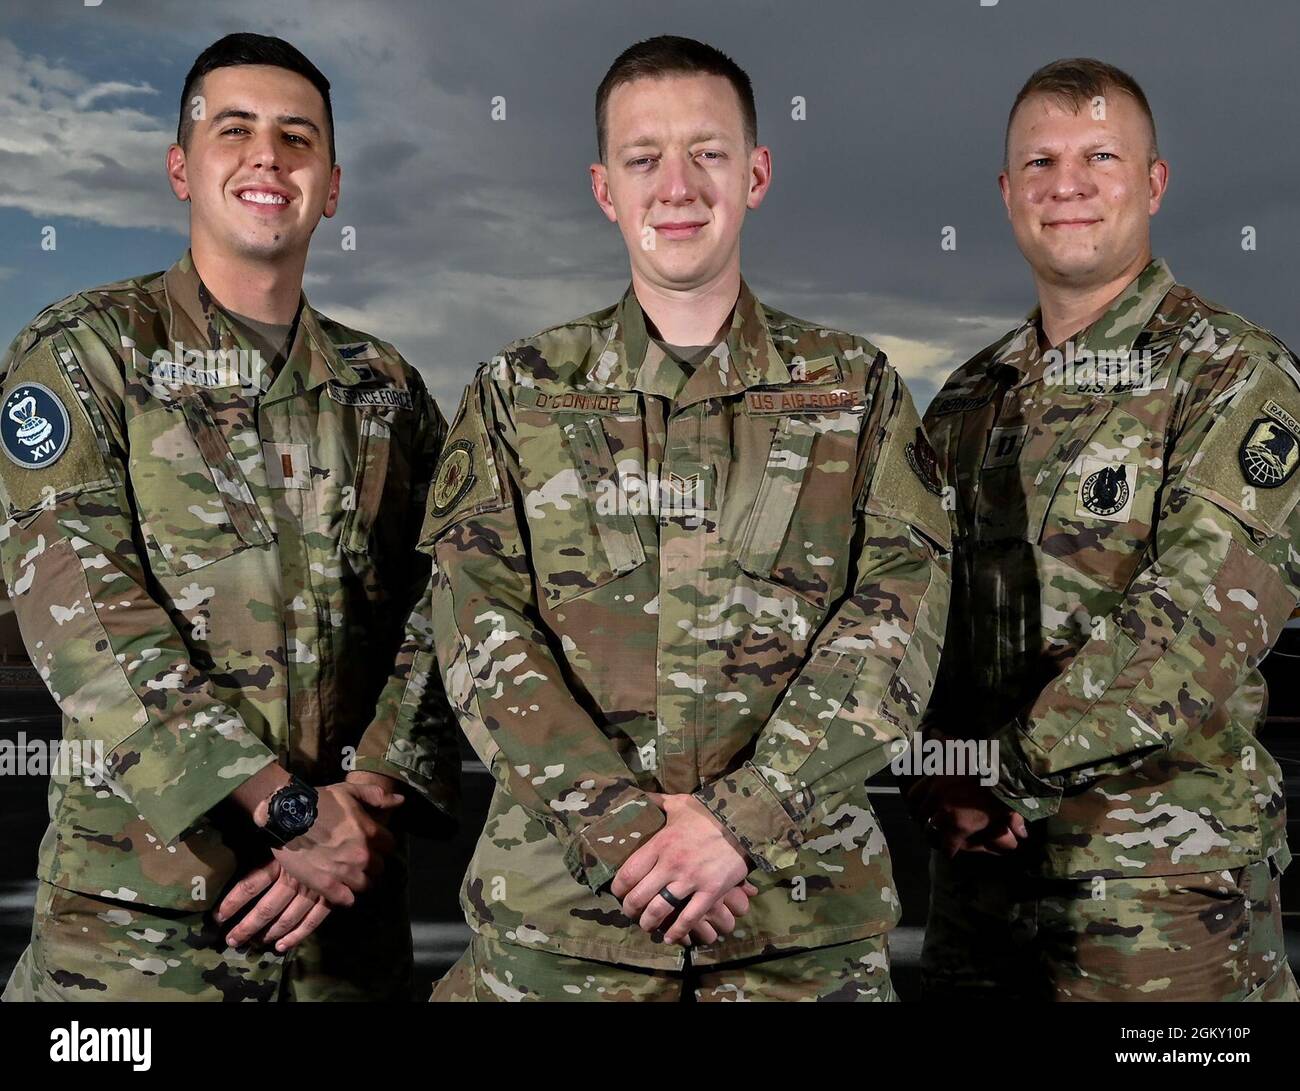 U.S. Space Force 2nd Lt. Nick Amerson, 16th Space Control Squadron crew commander, U.S. Air Force Staff Sgt. Shane O’Connor, 8th Space Warning Squadron staff instructor, and Capt. Gideon Bernthal, U.S. Army Space and Missile Defense Command G33 future operations space control planner, pose for a portrait, during Red Flag-Nellis 21-3 at Nellis Air Force Base, Nevada. Red Flag-Nellis 21-3 has hosted a new approach, integrating space components into both blue and red forces. These teams included U.S. Air Force, Army, Marines, Navy, and Space Force. Stock Photo